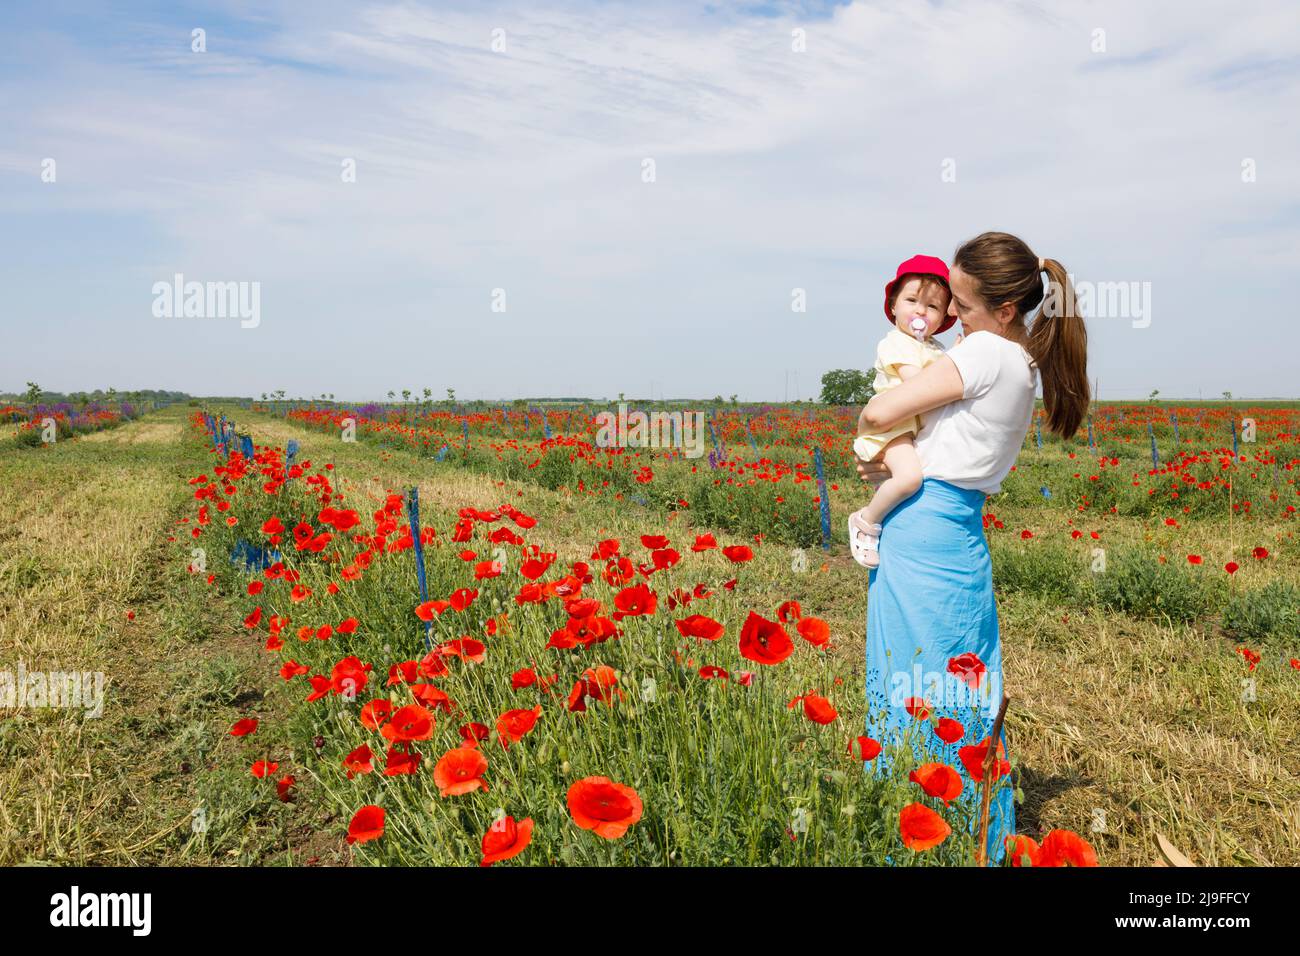 A woman and her daughter standing together in a red poppy field Stock Photo